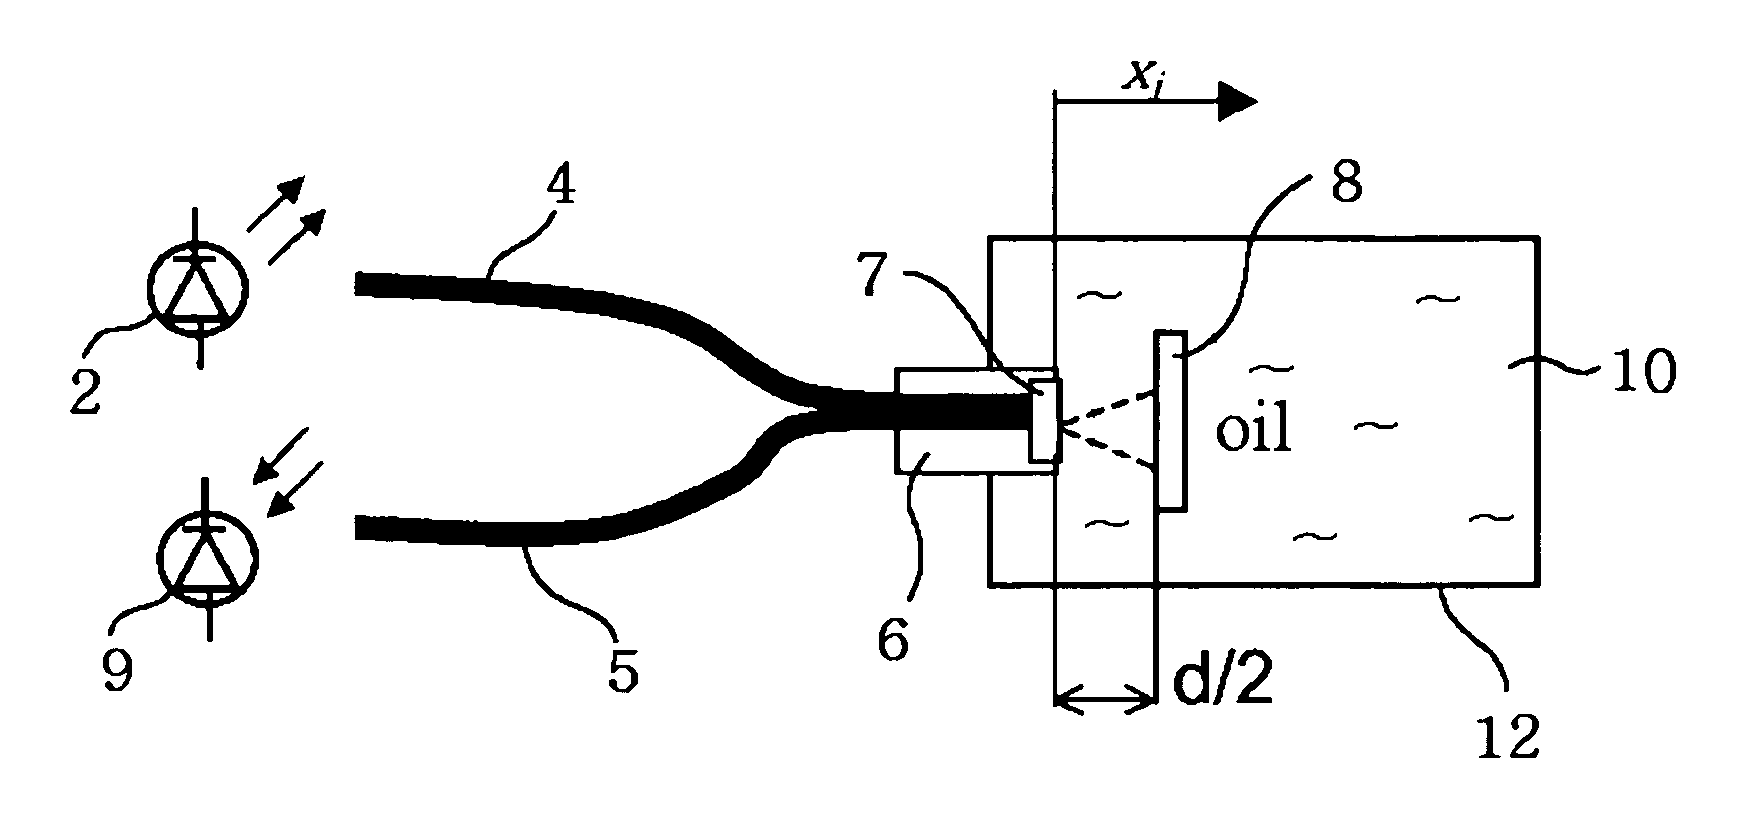 Apparatus for measuring oil oxidation using fluorescent light reflected from oil